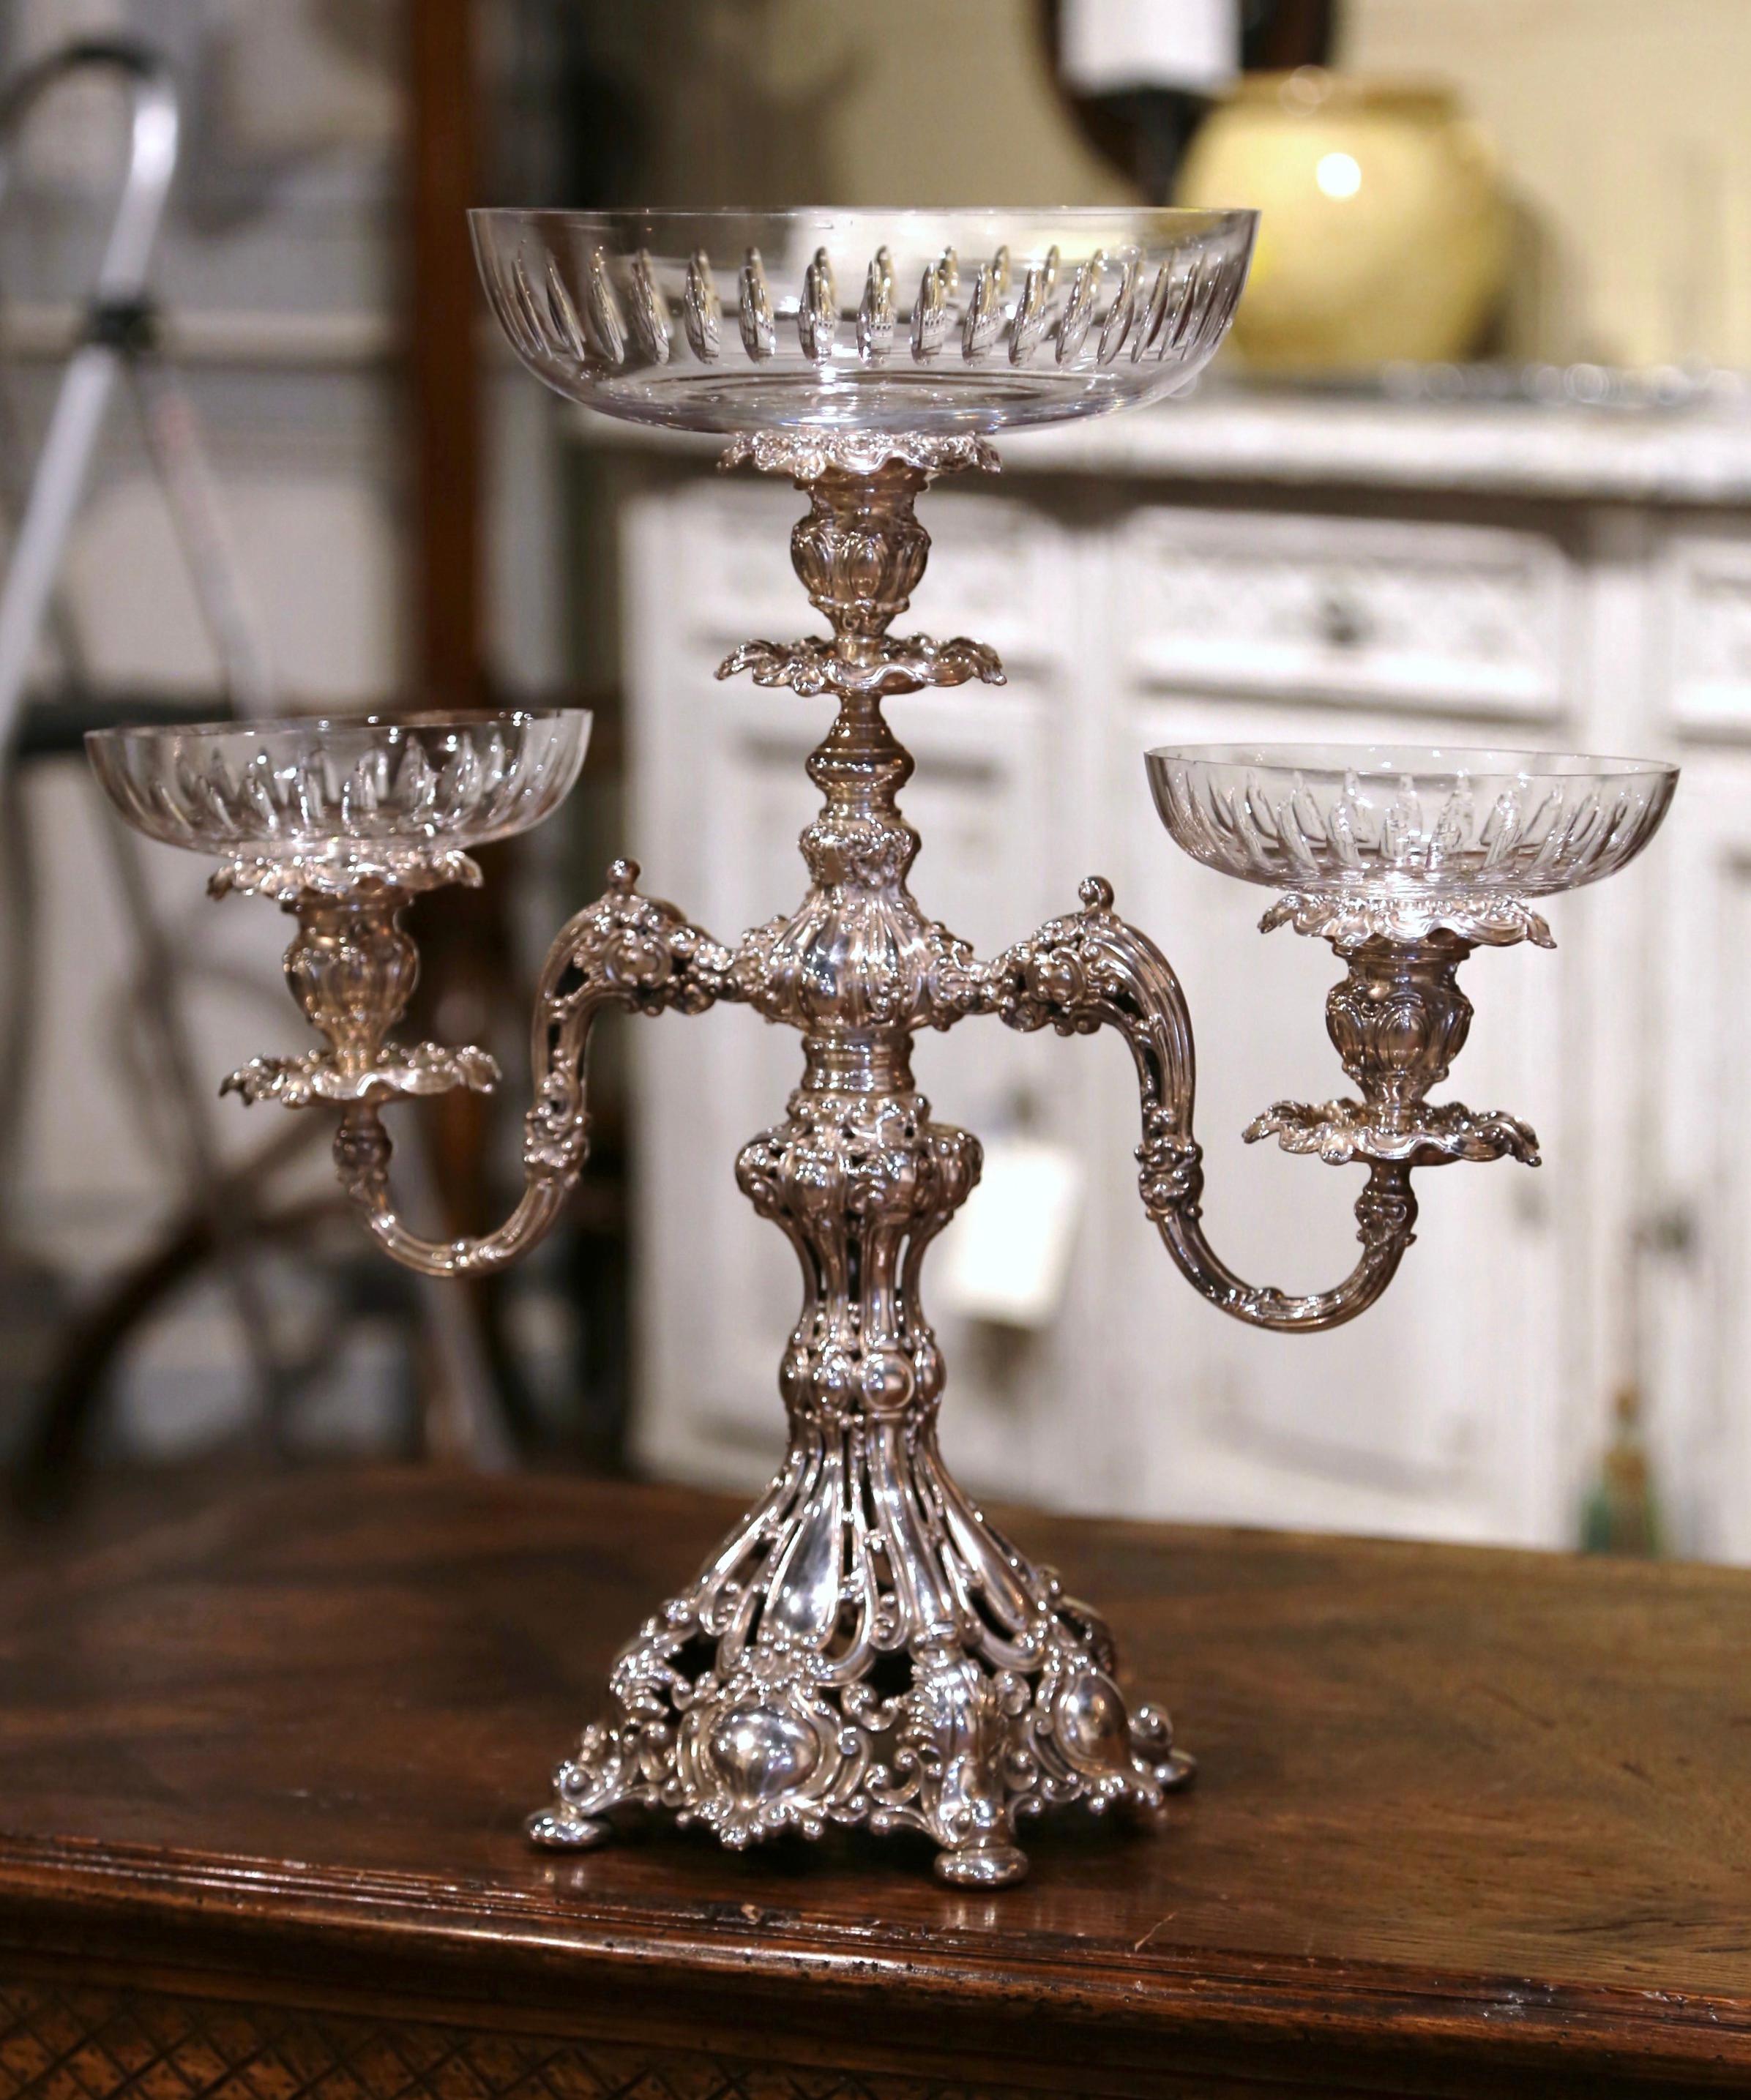 This elegant copper silver plated epergne was created in England, circa 1960. The antique centerpiece stands on rounded feet over a bottom dome decorated with intricate motifs. The dish with two arms features a large center cut crystal bowl and two